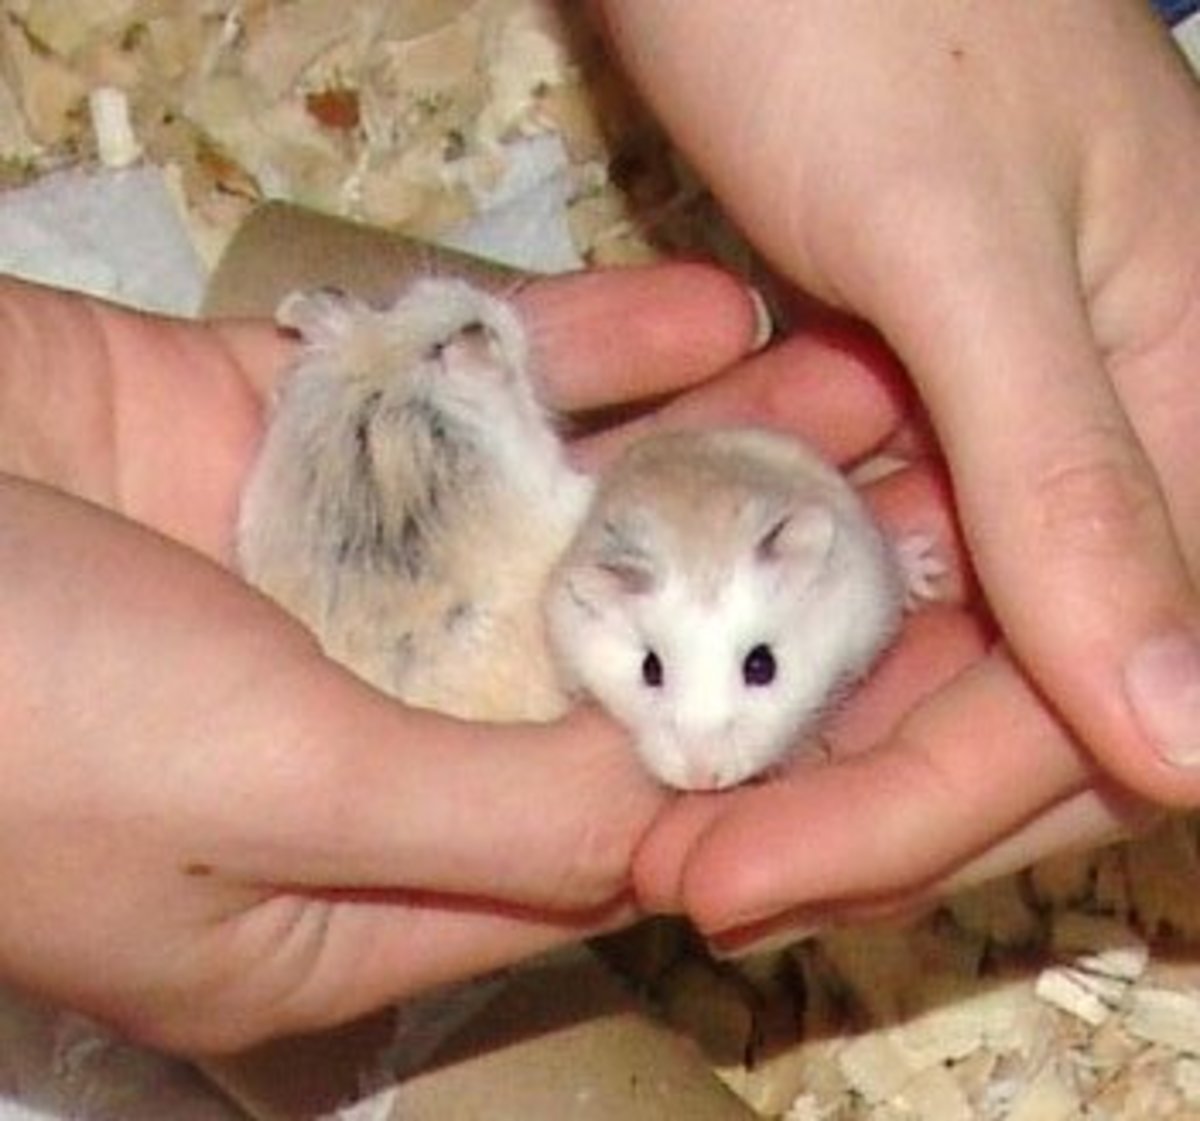 A Complete Guide to Roborovski Hamsters - PetHelpful